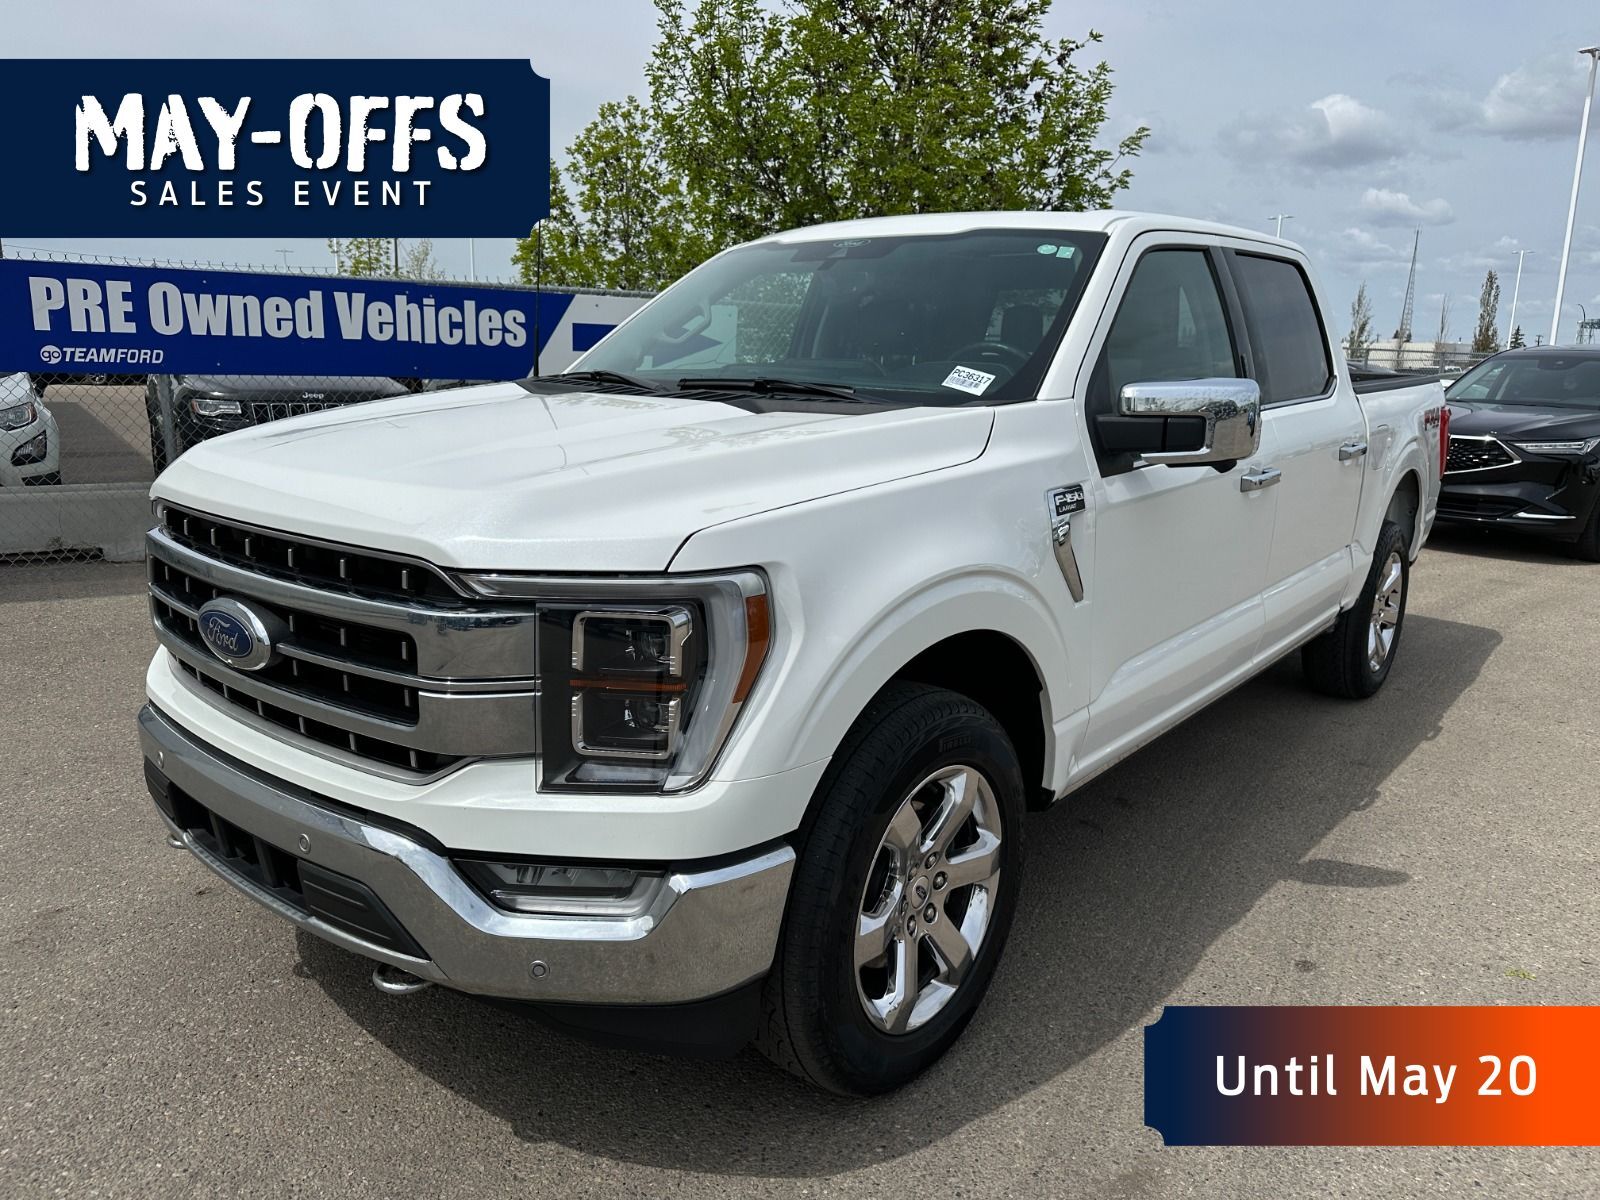 2022 Ford F-150 3.5L V6 ECOBOOST ENG, LARIAT, WIRELESS CHARGING PA